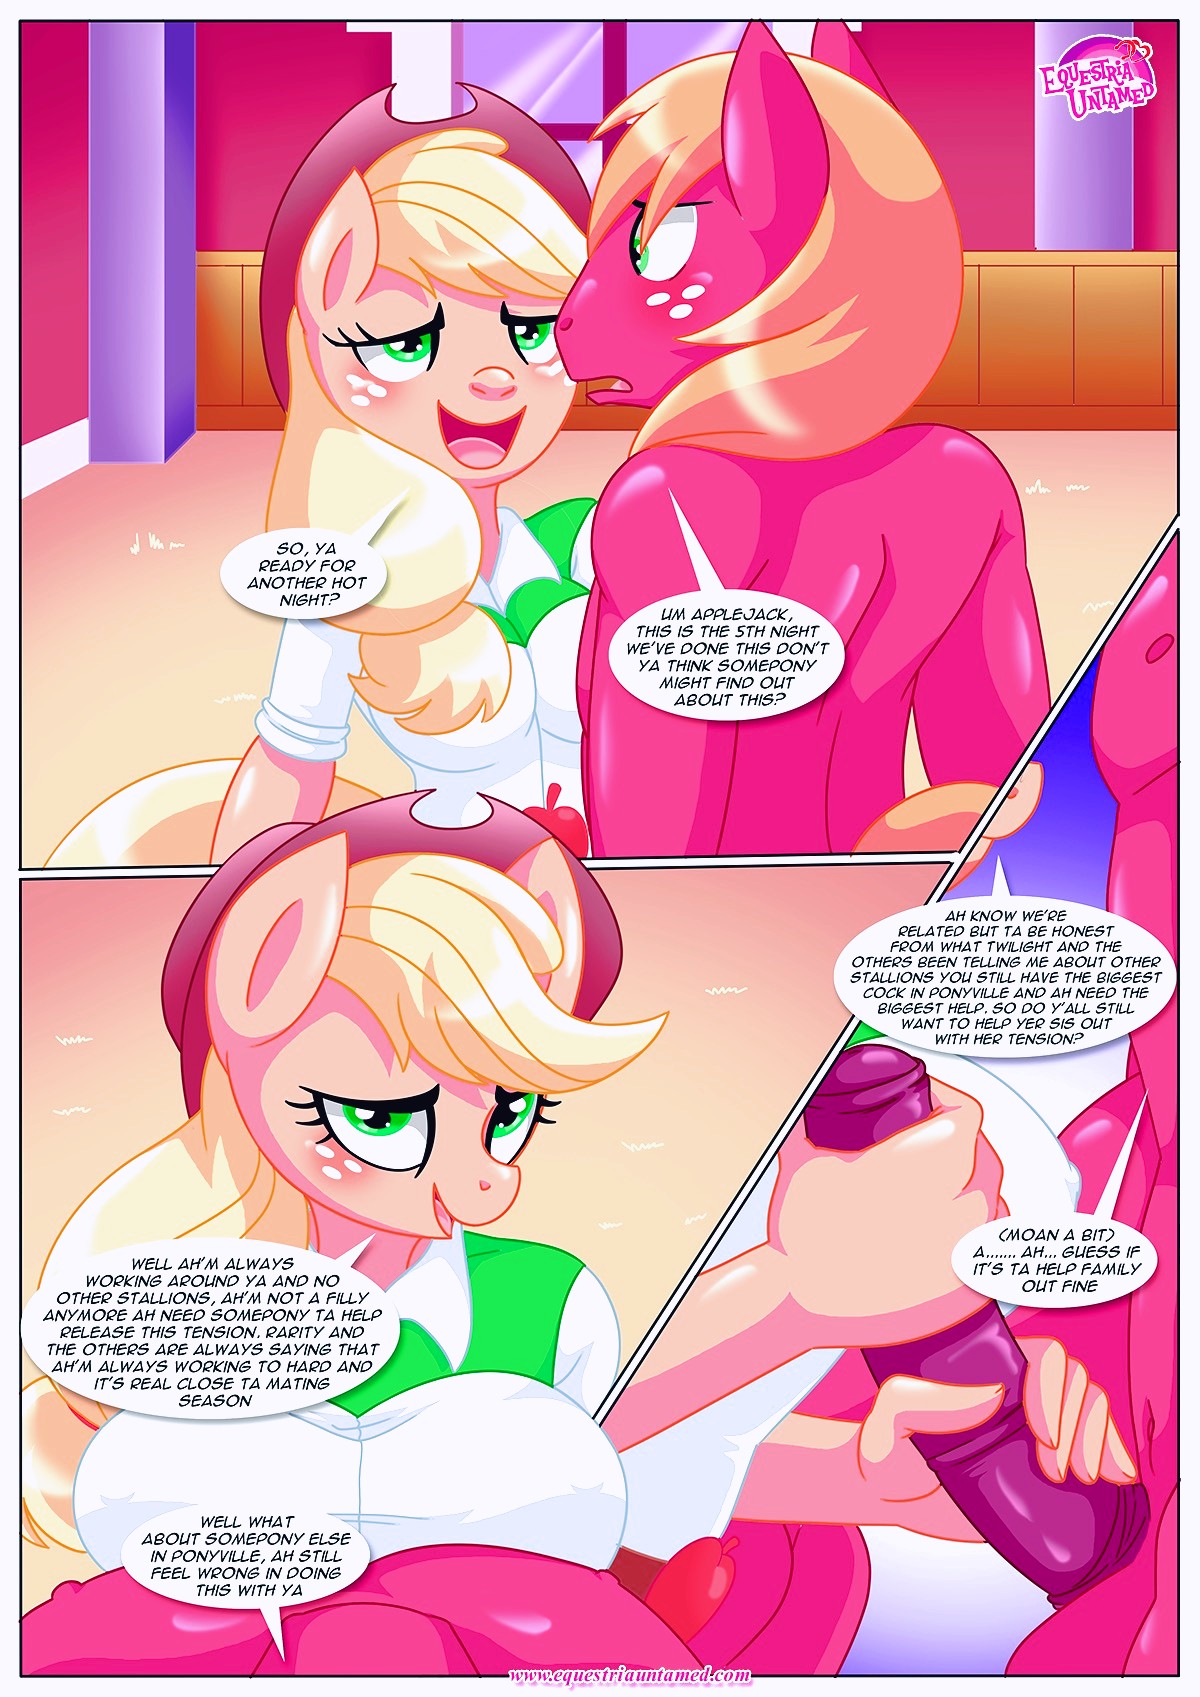 Airhostelfuck - My Little Pony Apple Jack Porn | Sex Pictures Pass